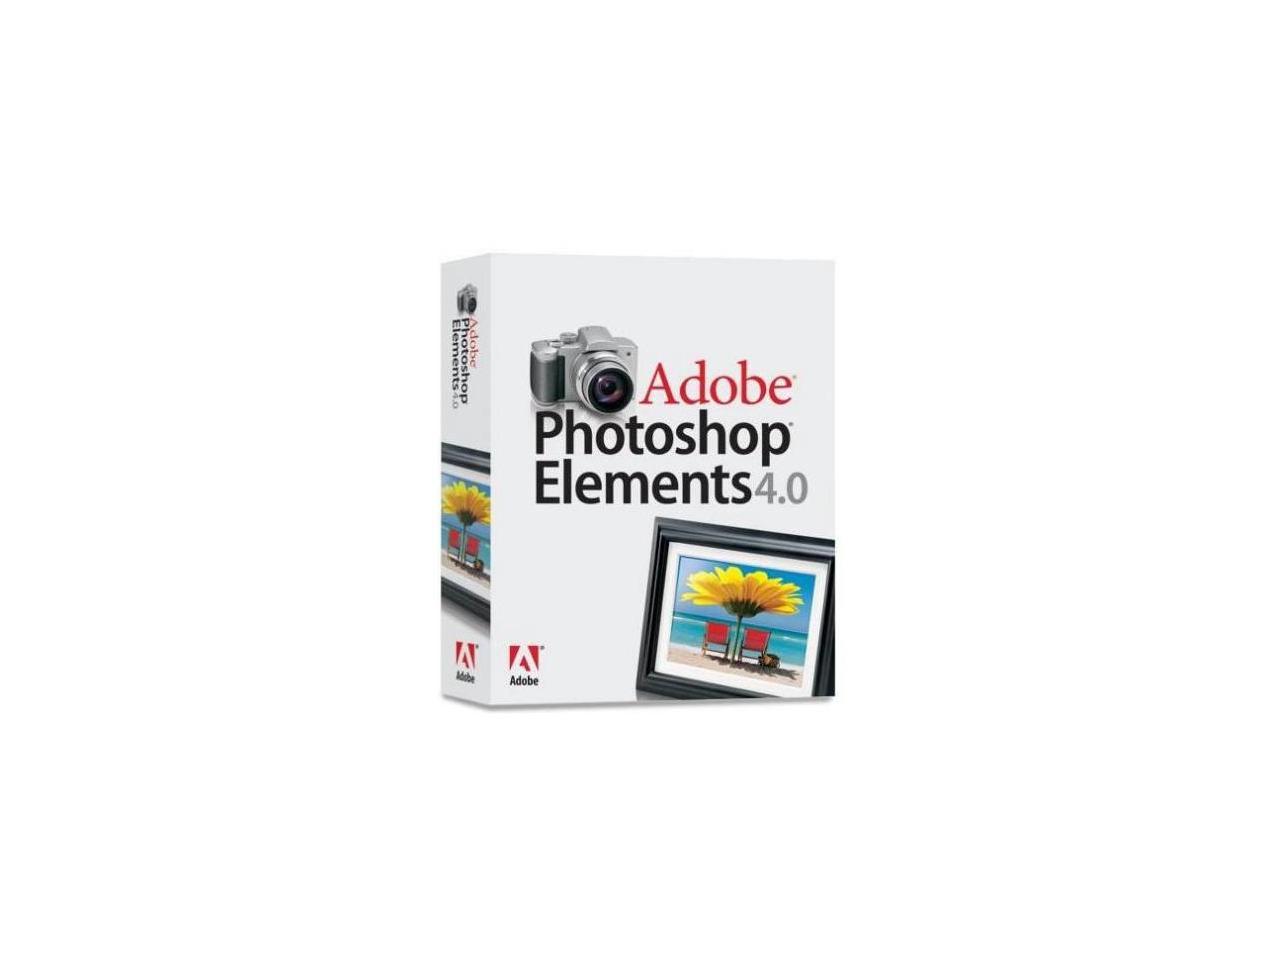 Adobe photoshop elements 4.0 free download full version adobe illustrator cs6 full version free download with serial key